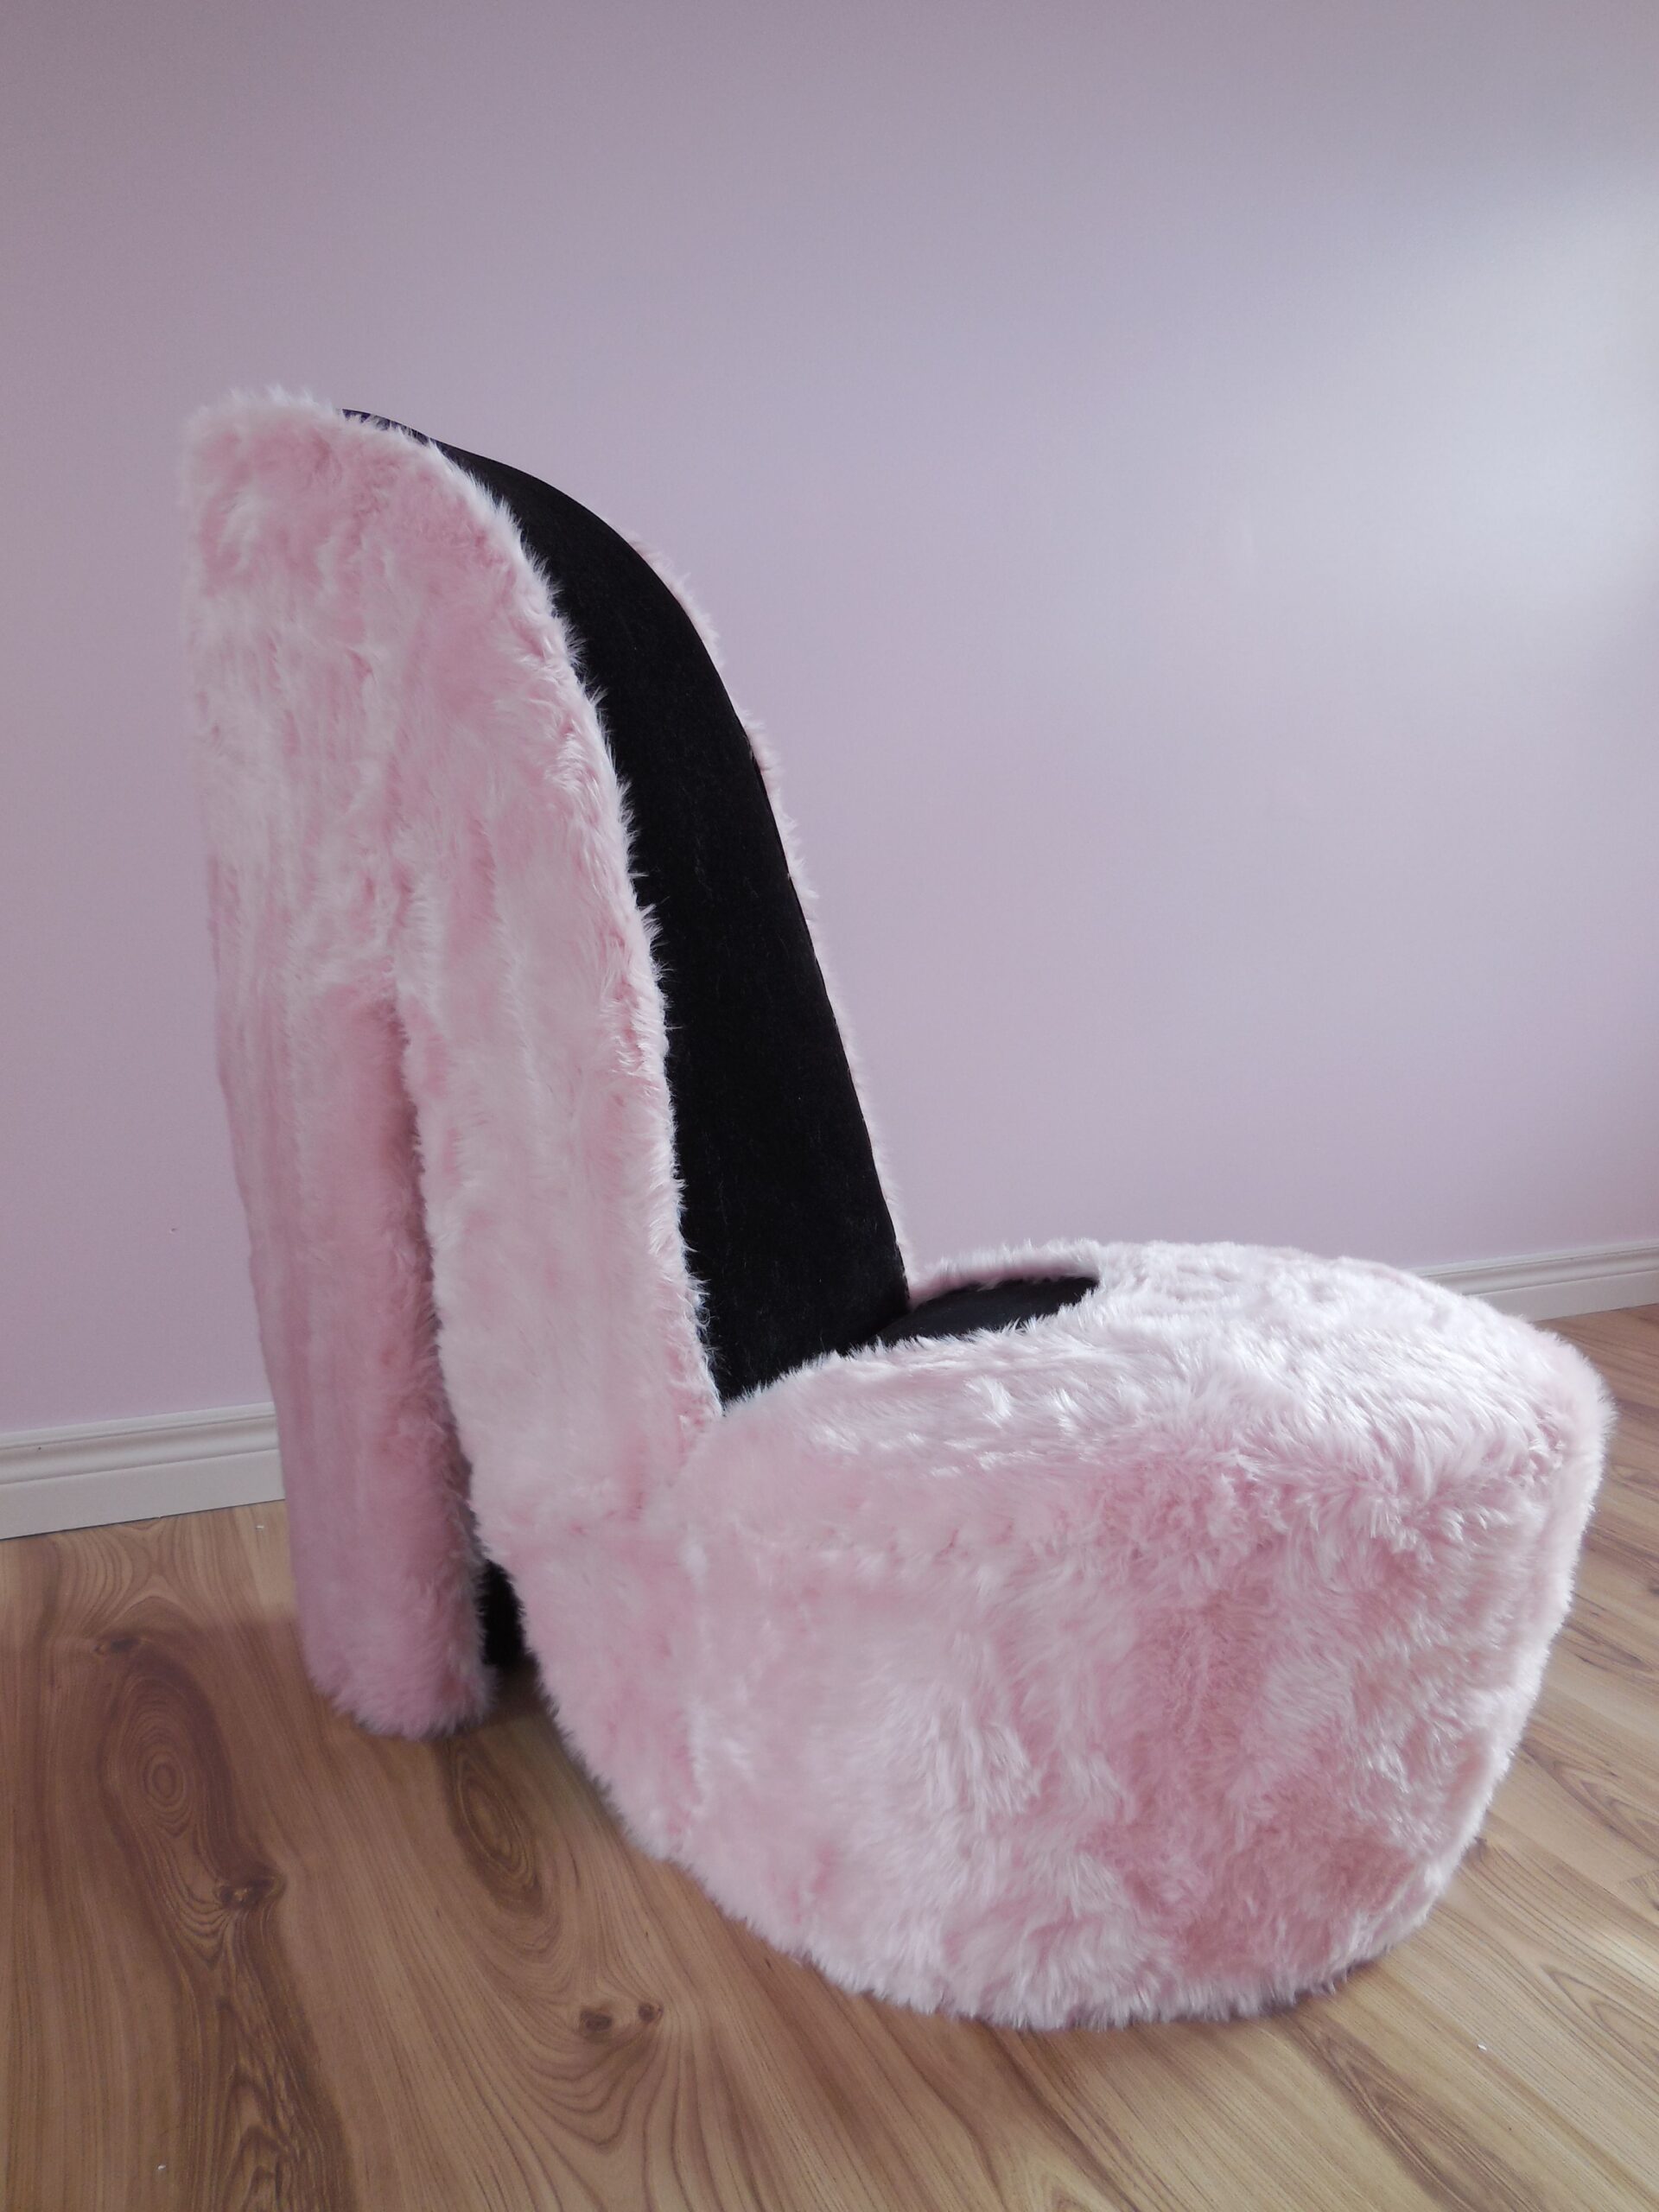 Step Up Your Style with a High Heel Shoe Chair